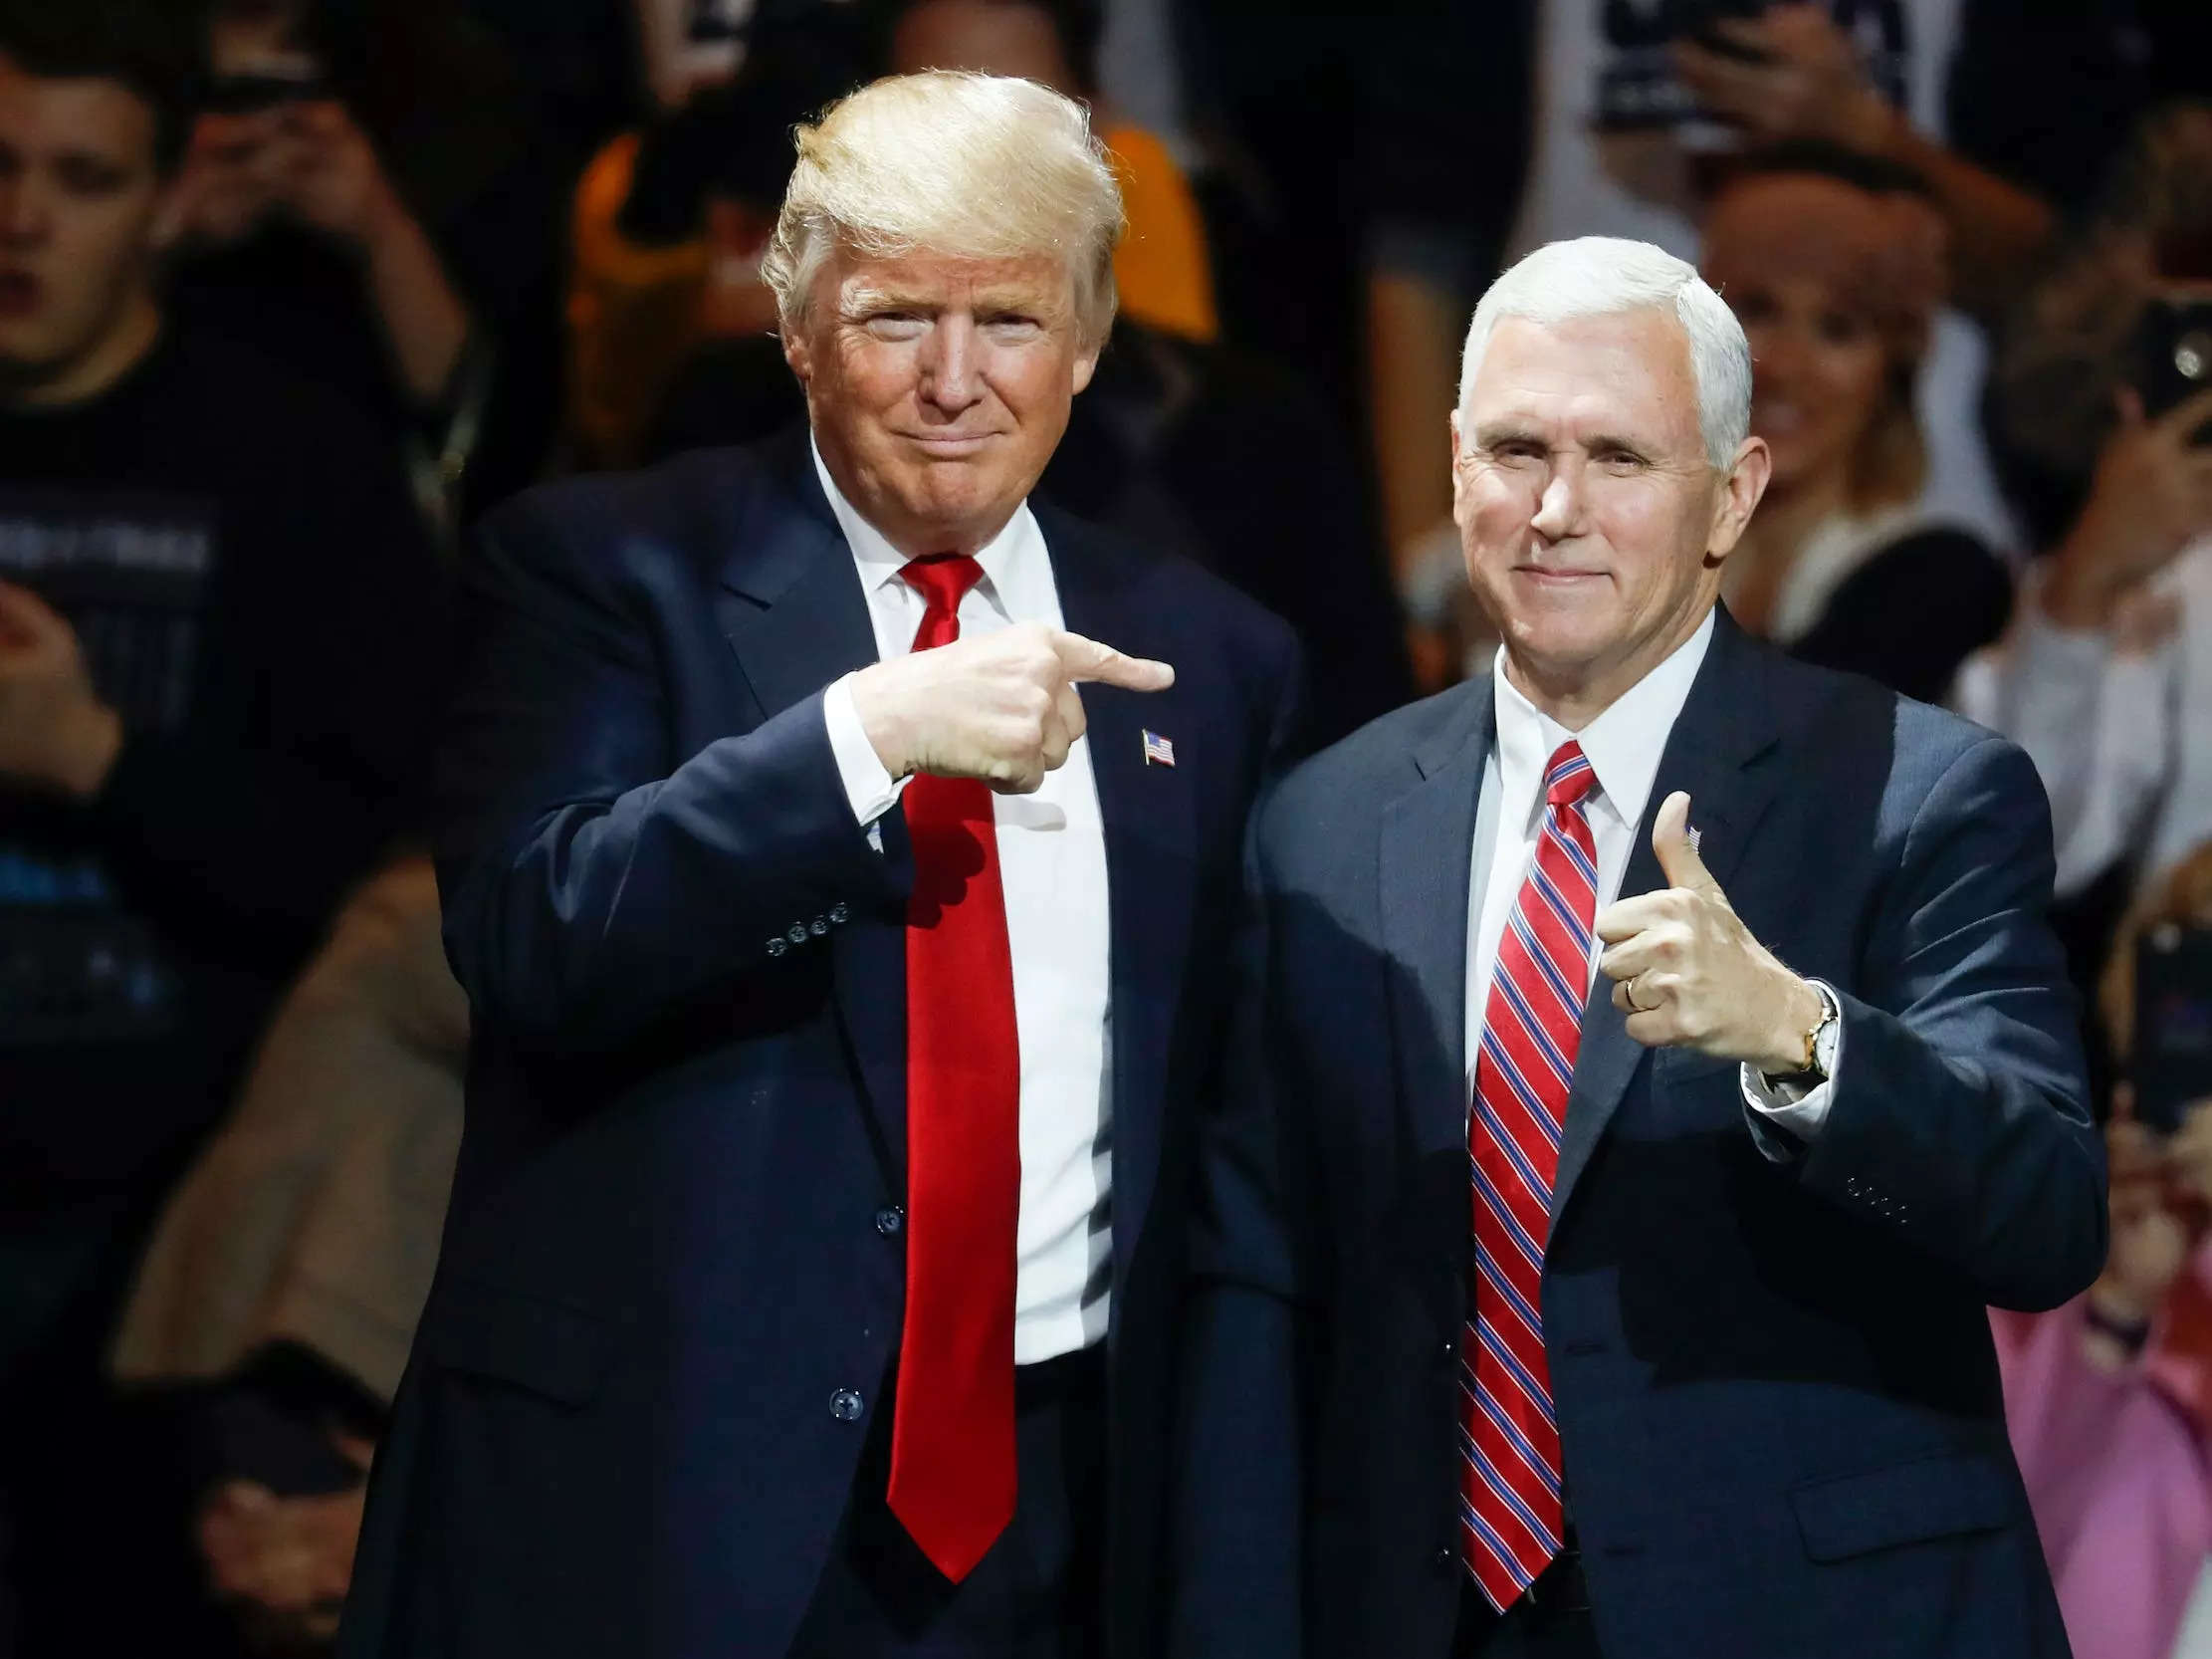 Former President elect Donald Trump, left, and former Vice President Mike Pence acknowledge the crowd during the first stop of his post-election tour, in Cincinnati on December 1, 2016.